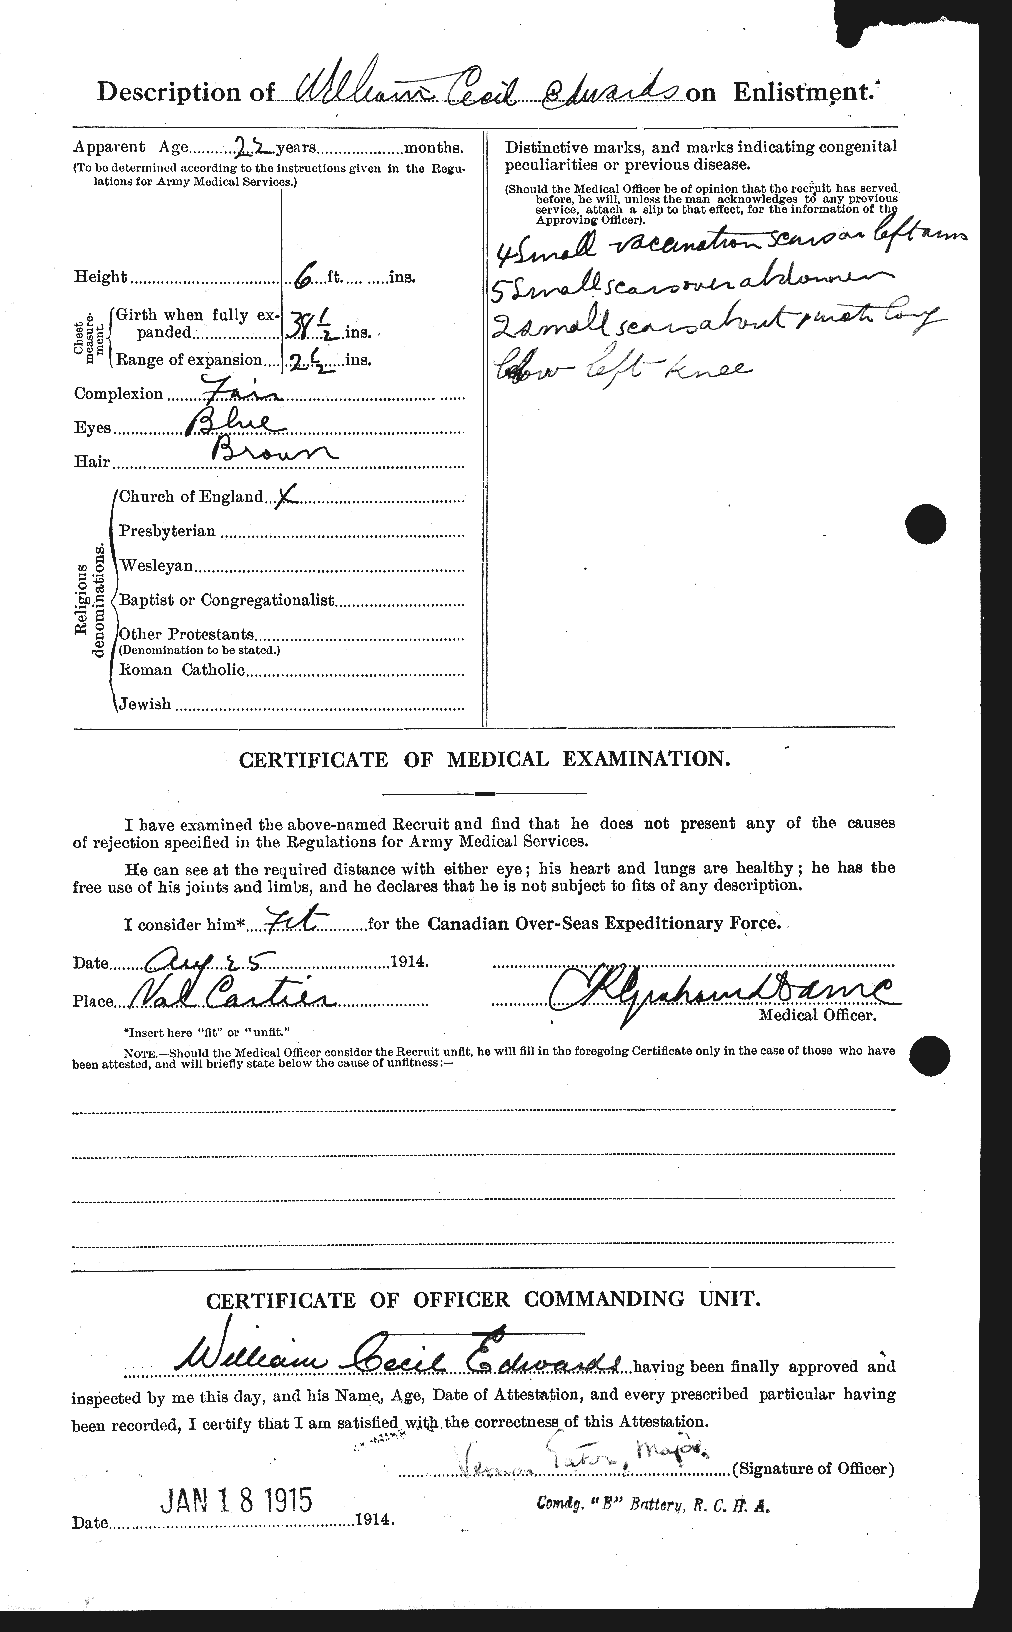 Personnel Records of the First World War - CEF 310415b